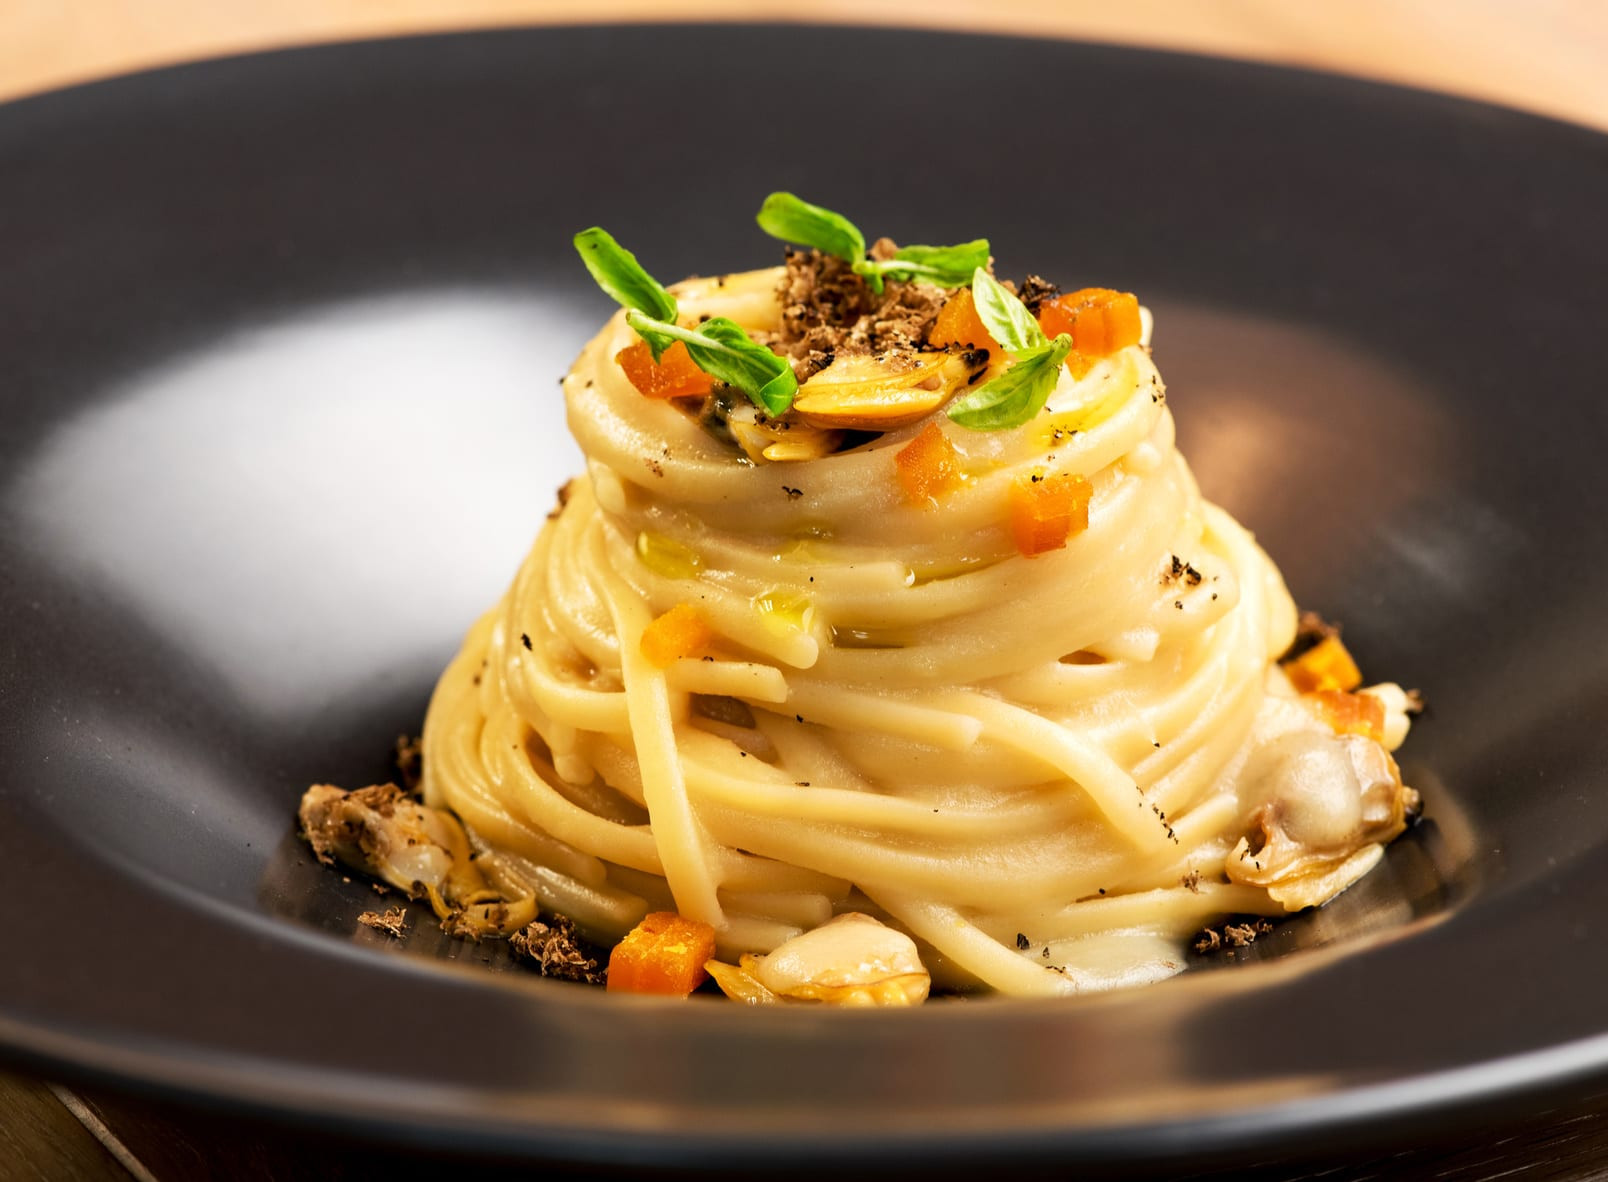 Gourmet Appetizers Online Inspirational Gourmet Appetizer with Linguine Clams and Truffle Buy